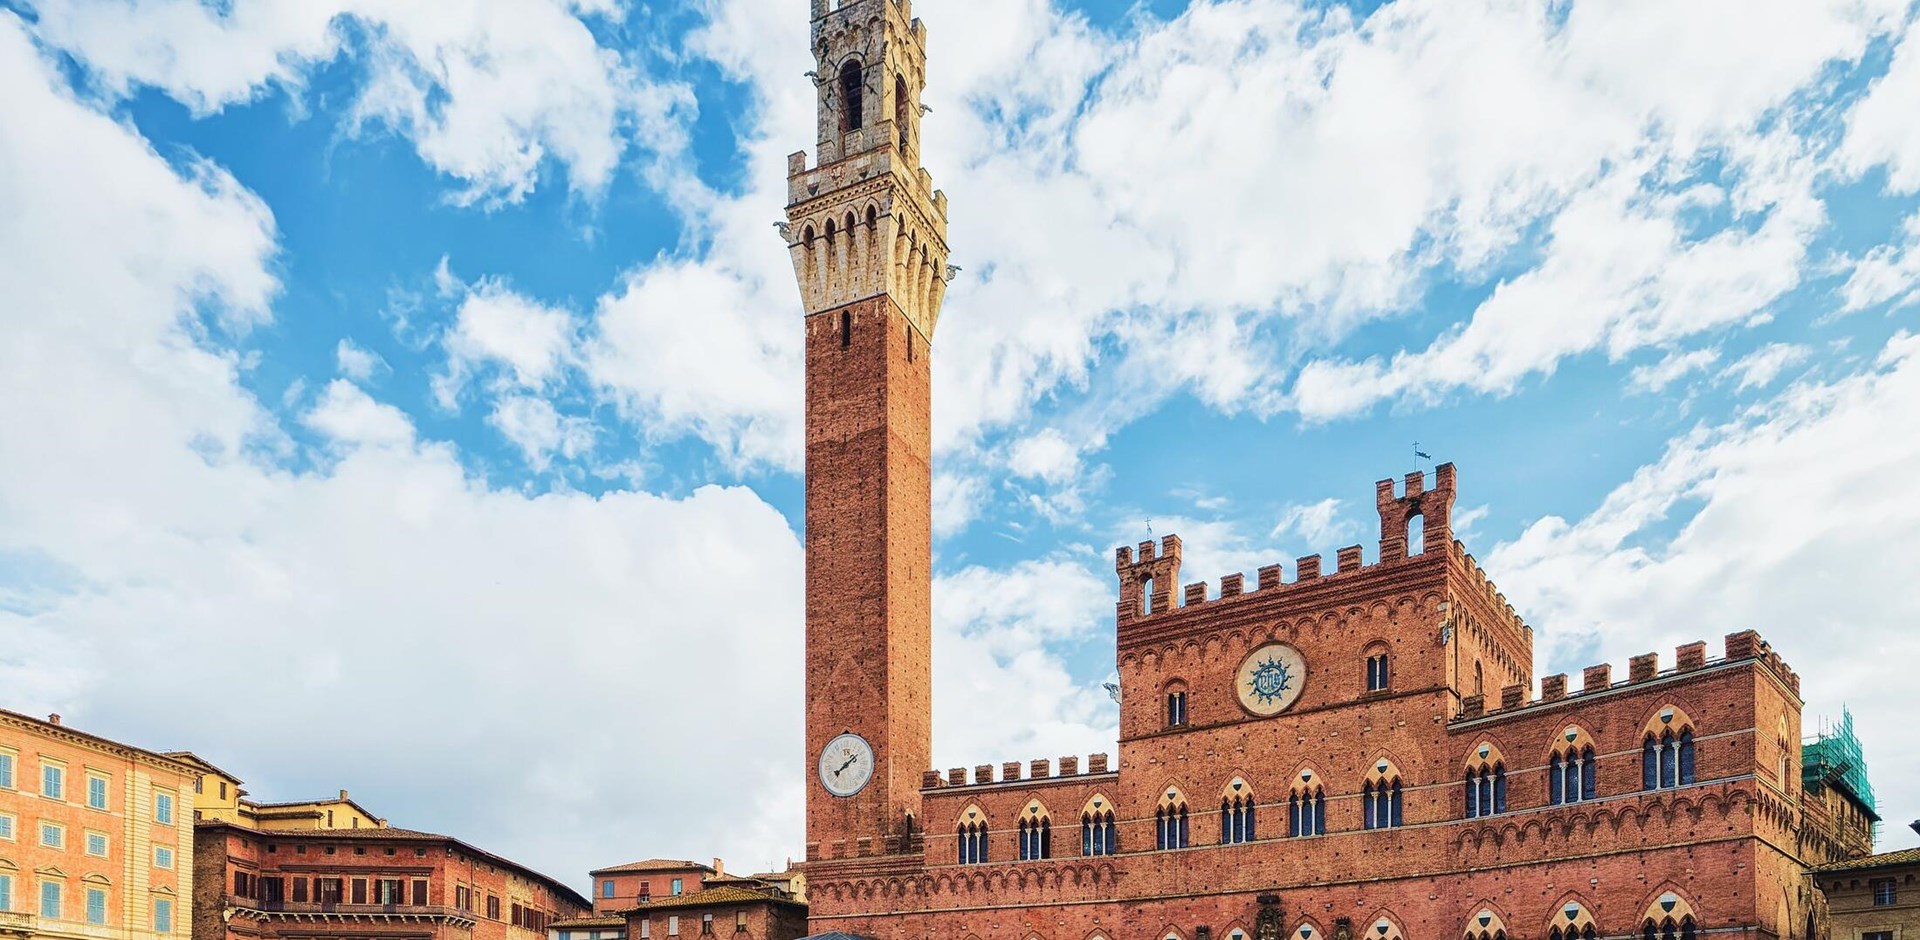 People at Torre del Magnia Tower on Piazza Campo Square in Siena, Tuscany, Italy